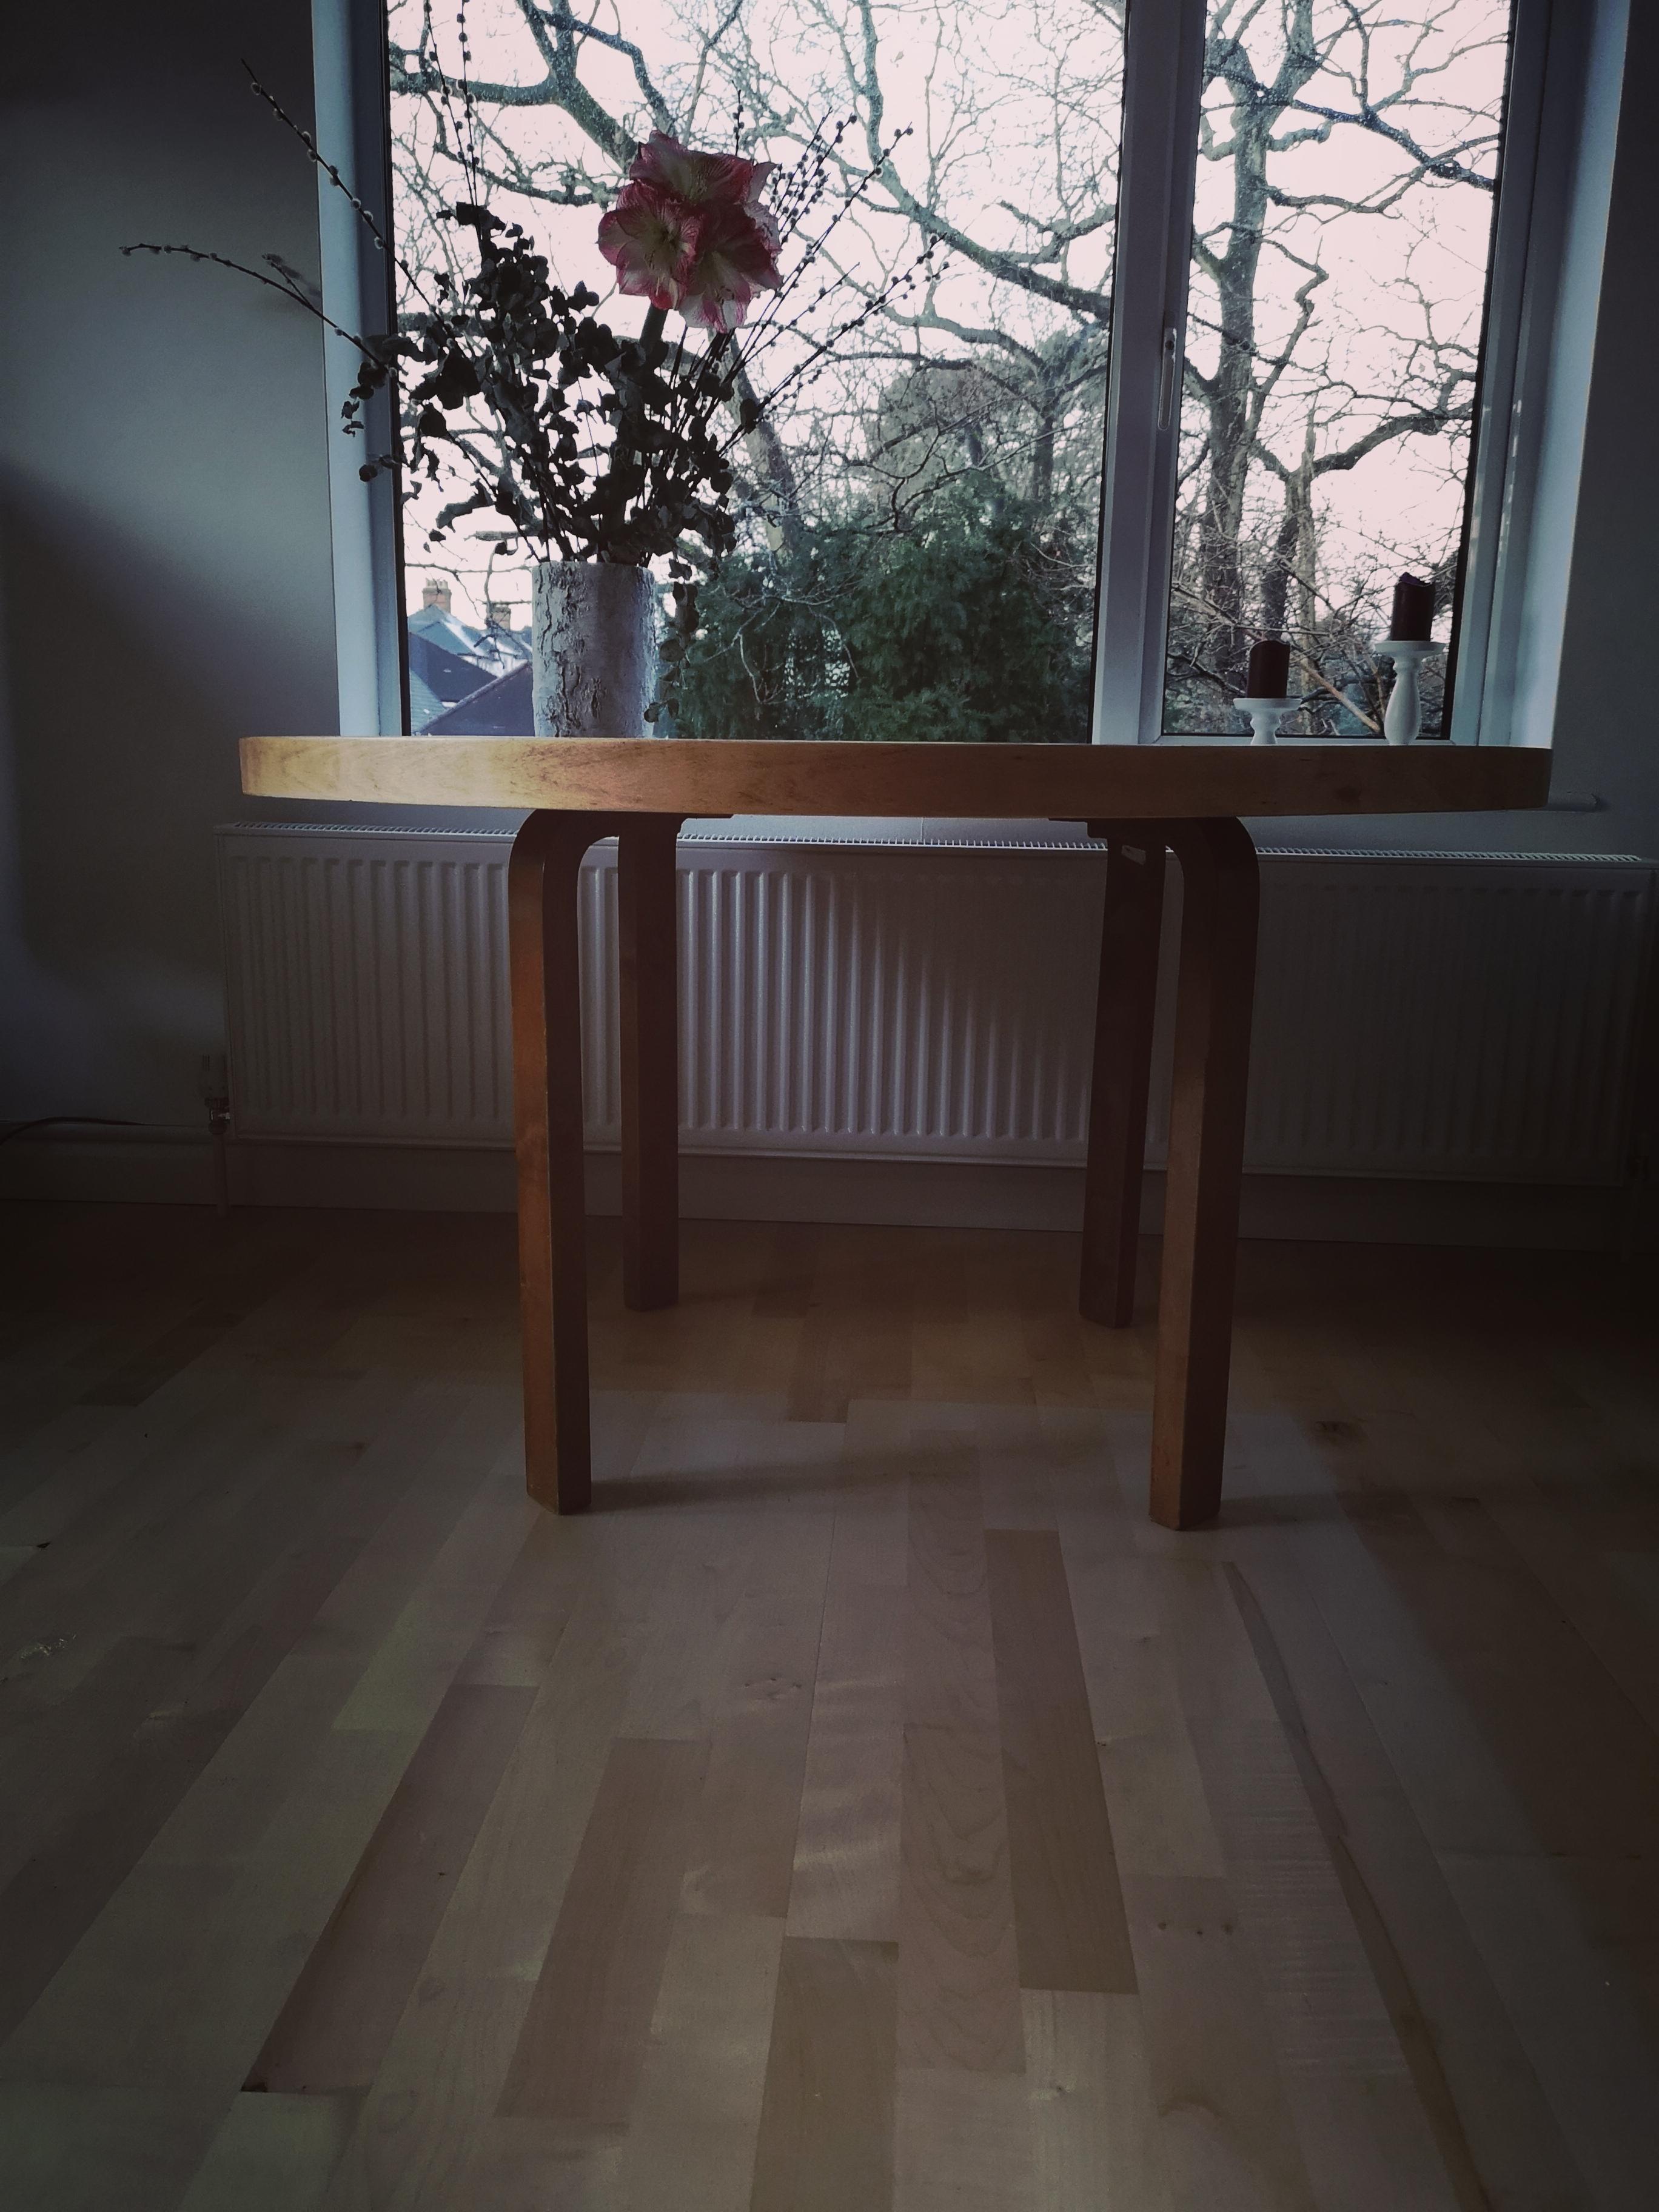 A sunning early vintage Alvar Aalto dining table 91, circa 1940s. The tabletop is dark wood veneer, with lighter color wood band on the edge. The original lacquer was peeling off, so the tabletop has just been professionally restored, stripped down